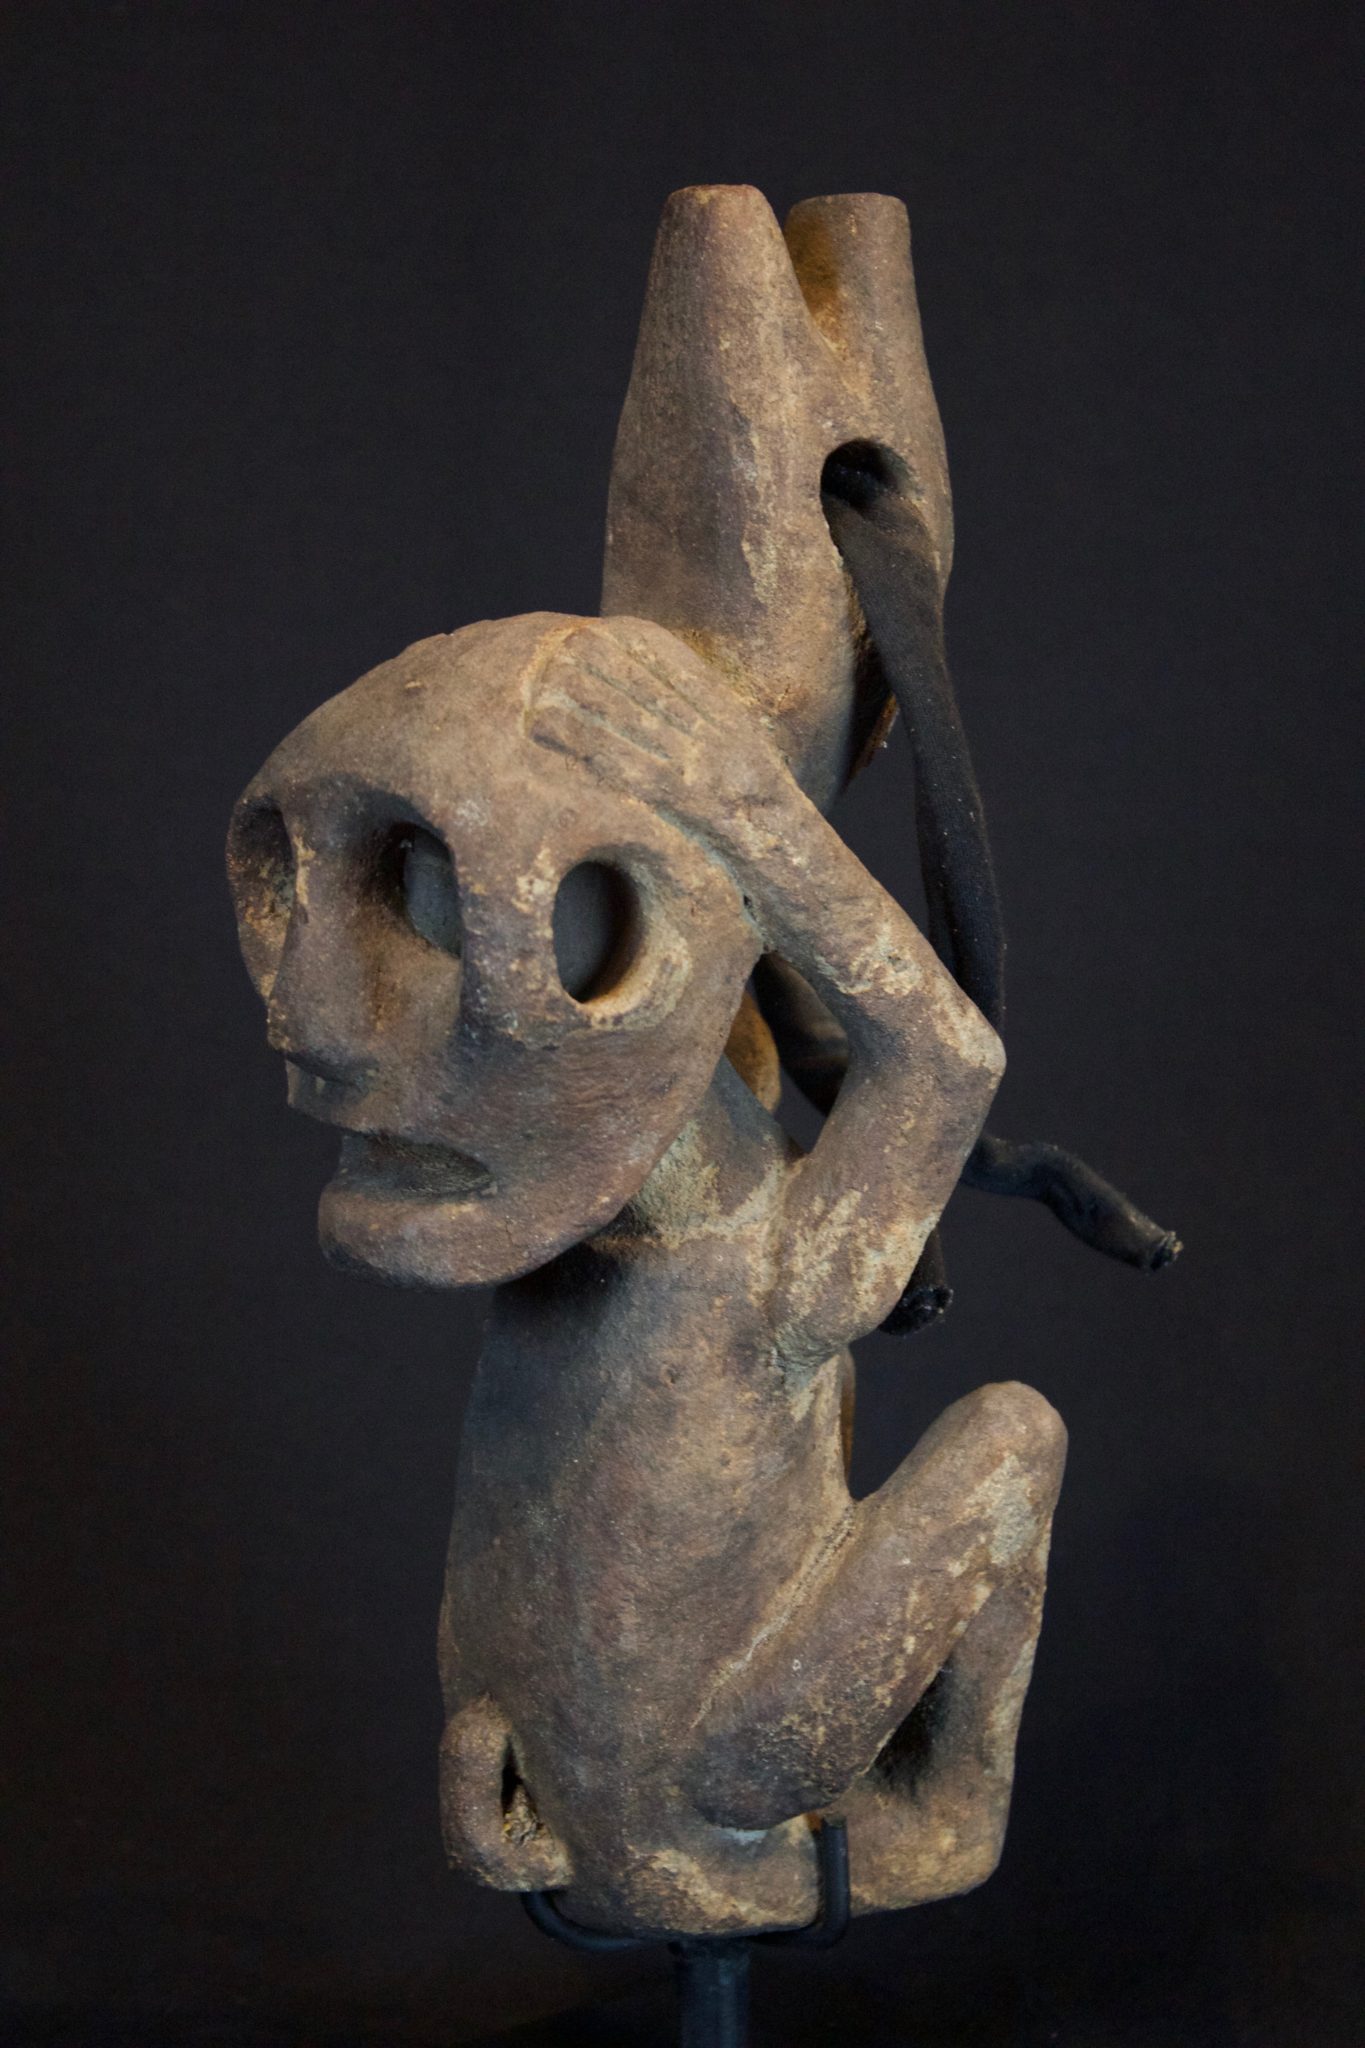 Shaman Figure, Central Flores Island, Lesser Sunda Islands, Indonesia Island, Japu village, Early 20th c, Stone, cloth strap. For protecting the clan house and for divination, 11” x 3 ½” x 5 ½”, $800.